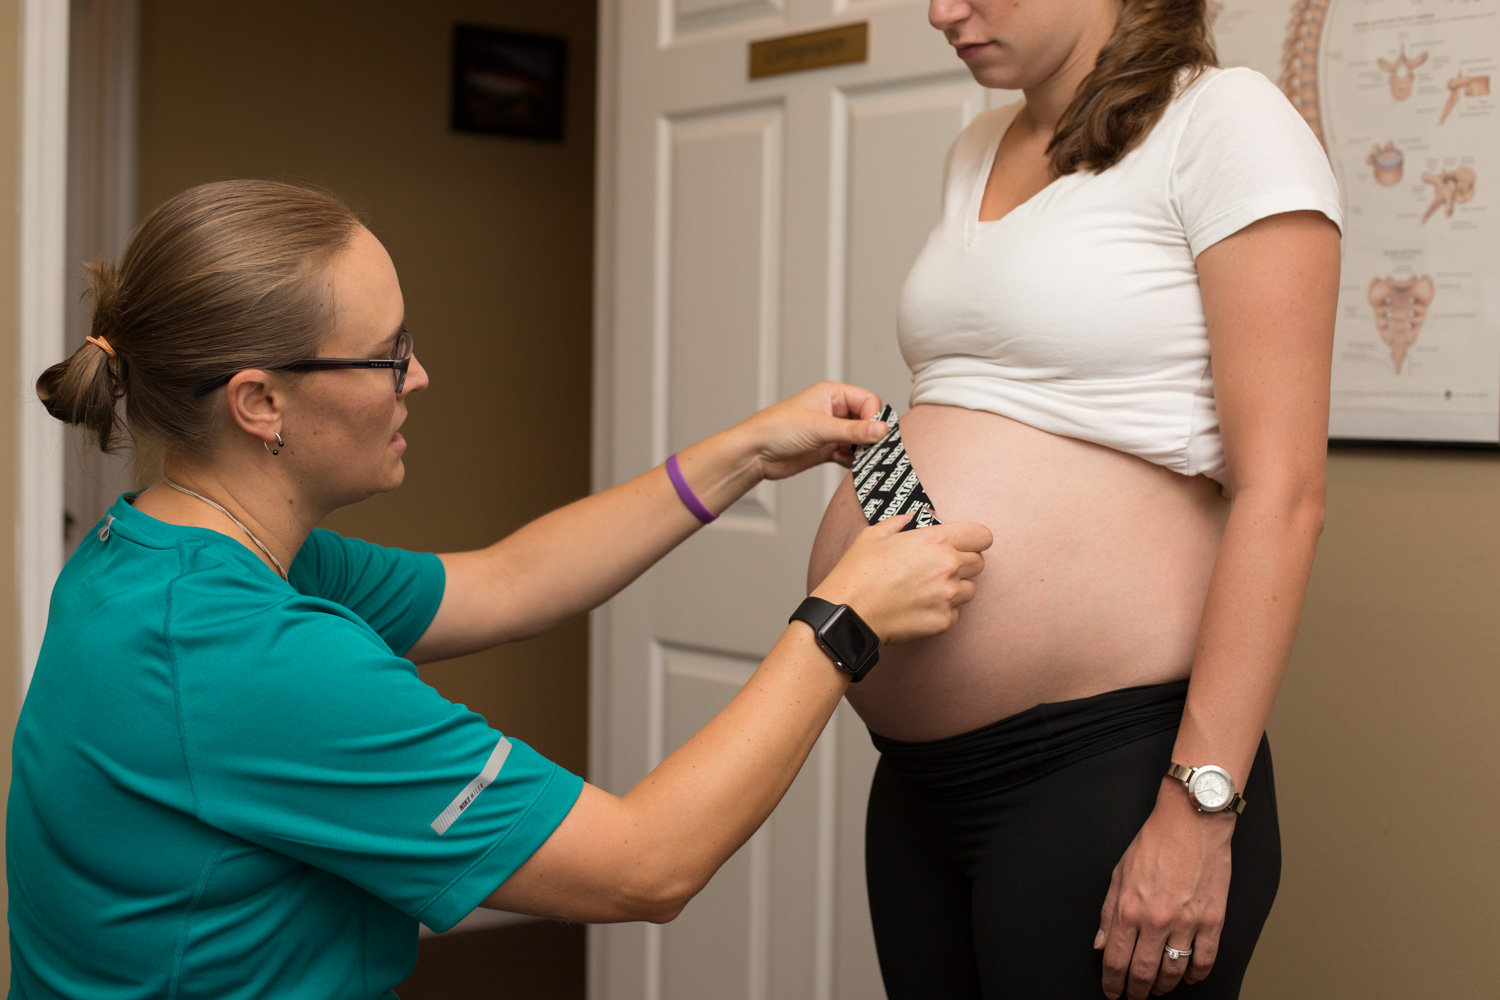 Helping New Mothers - RockTape for C-Section Scars - RockTape